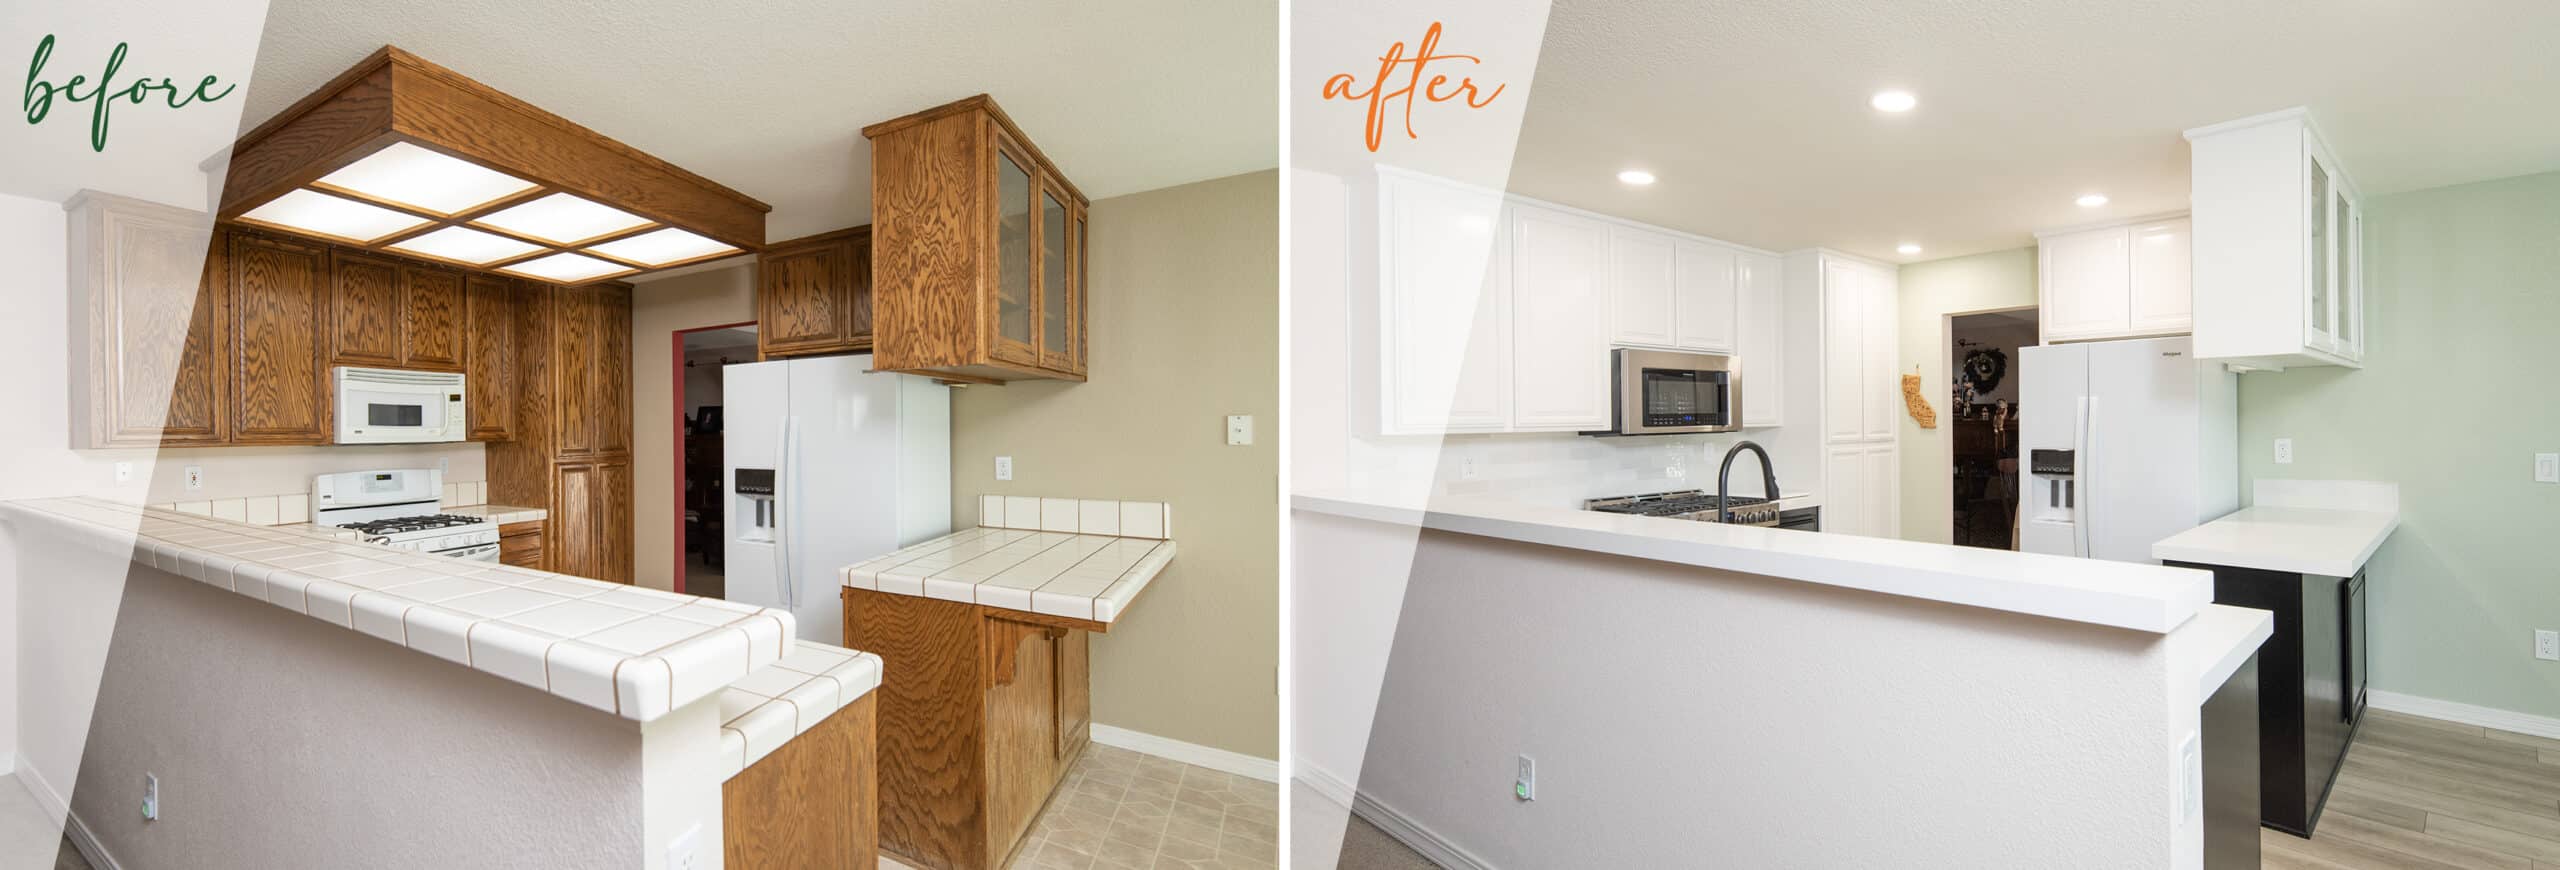 Before & After Kitchen Remodel 